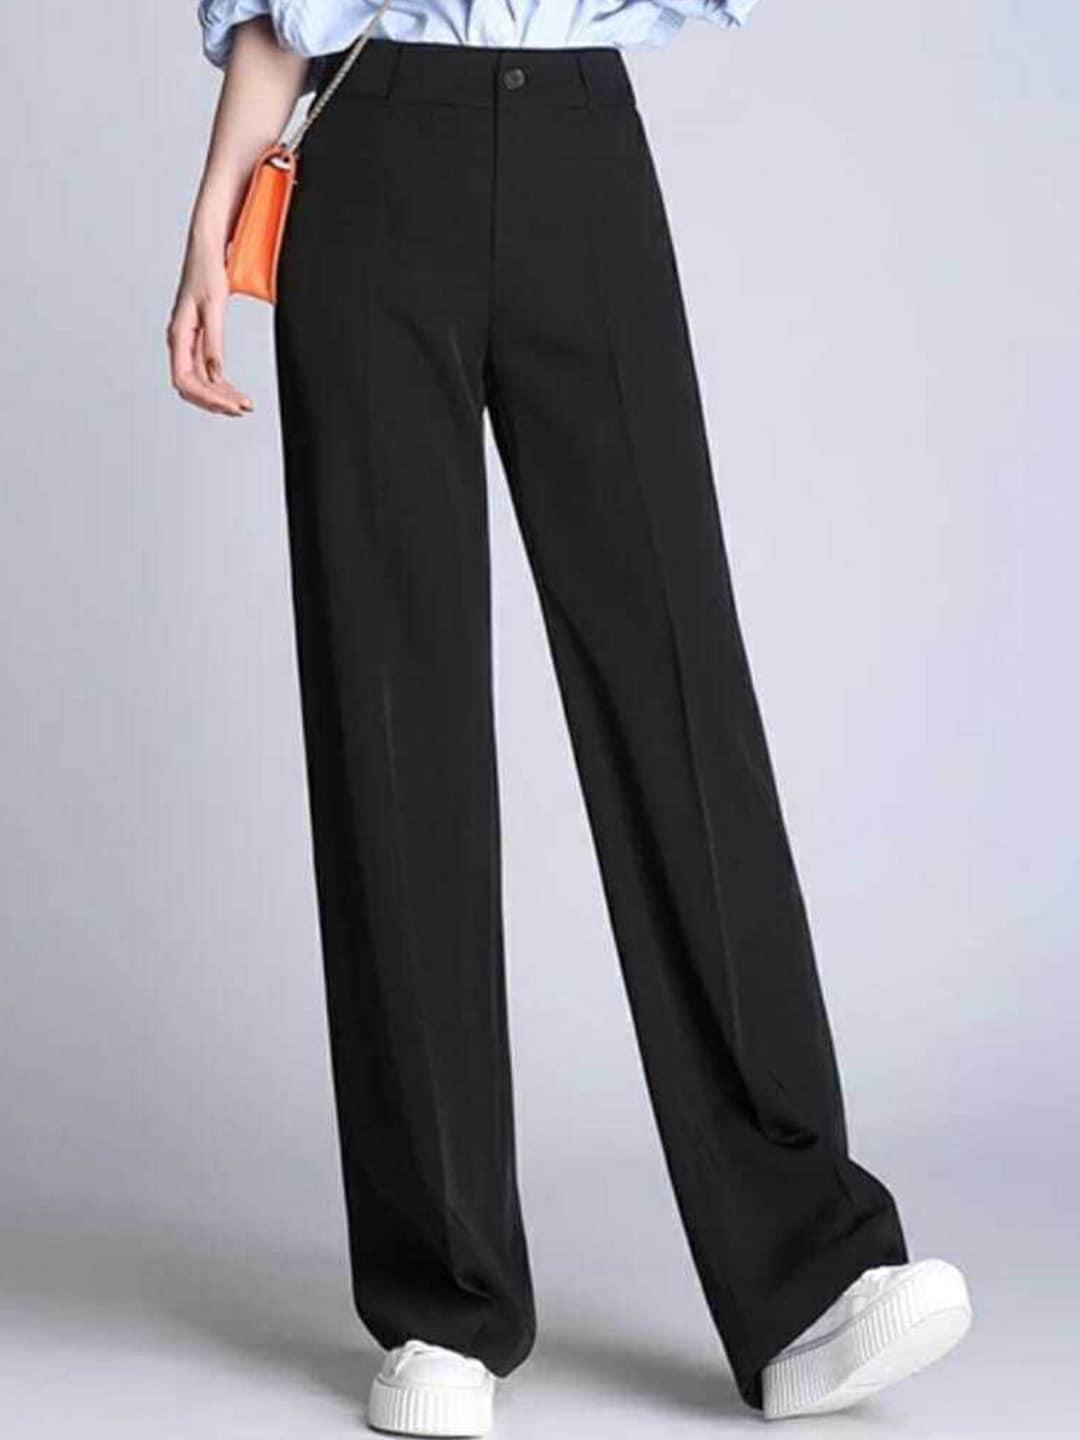 next-one-women-relaxed-straight-leg-loose-fit-high-rise-easy-wash-trouser